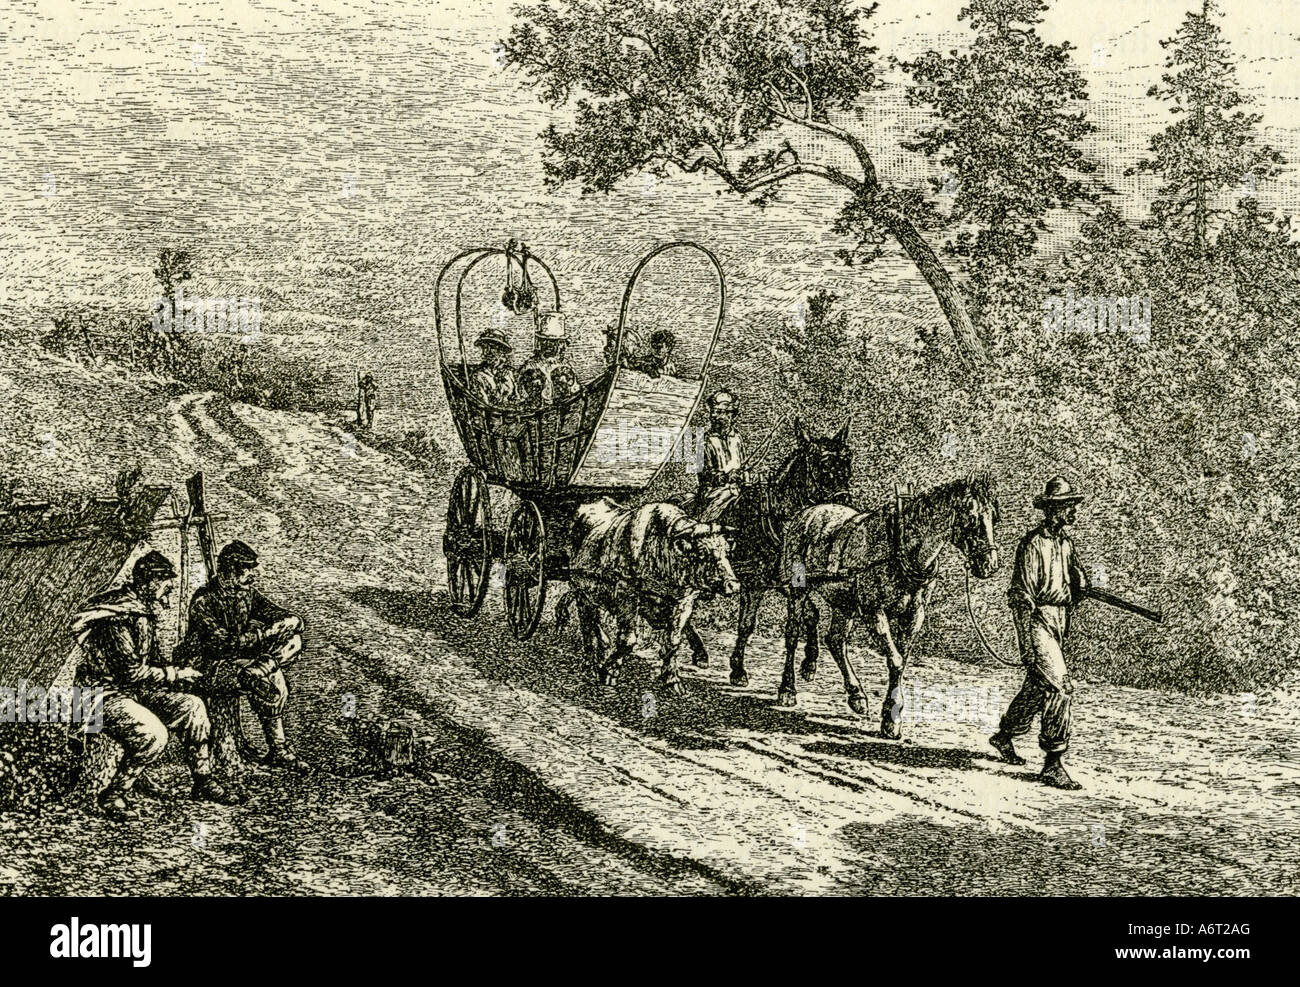 georgrafy/travel, USA, American Civil War 1861 - 1865, fleeing slaves, 'contrabande', passing the Army of the Potomac lines, engraving after scetch by Edwin Forbes, Virginia, 1862, , Stock Photo